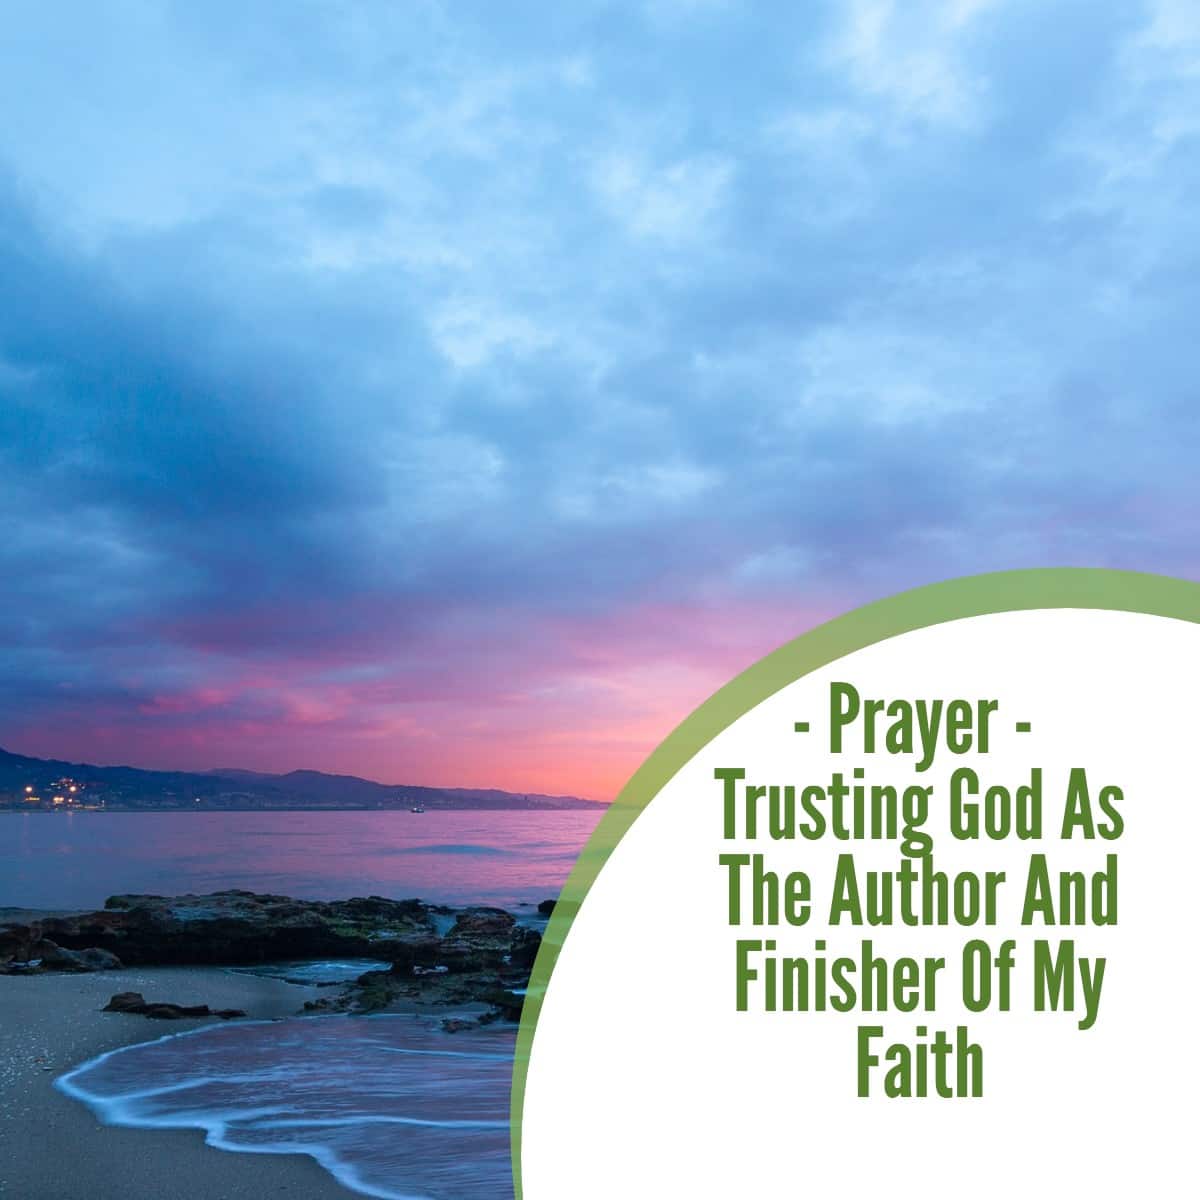 Prayer: Trusting God As The Author And Finisher Of My Faith